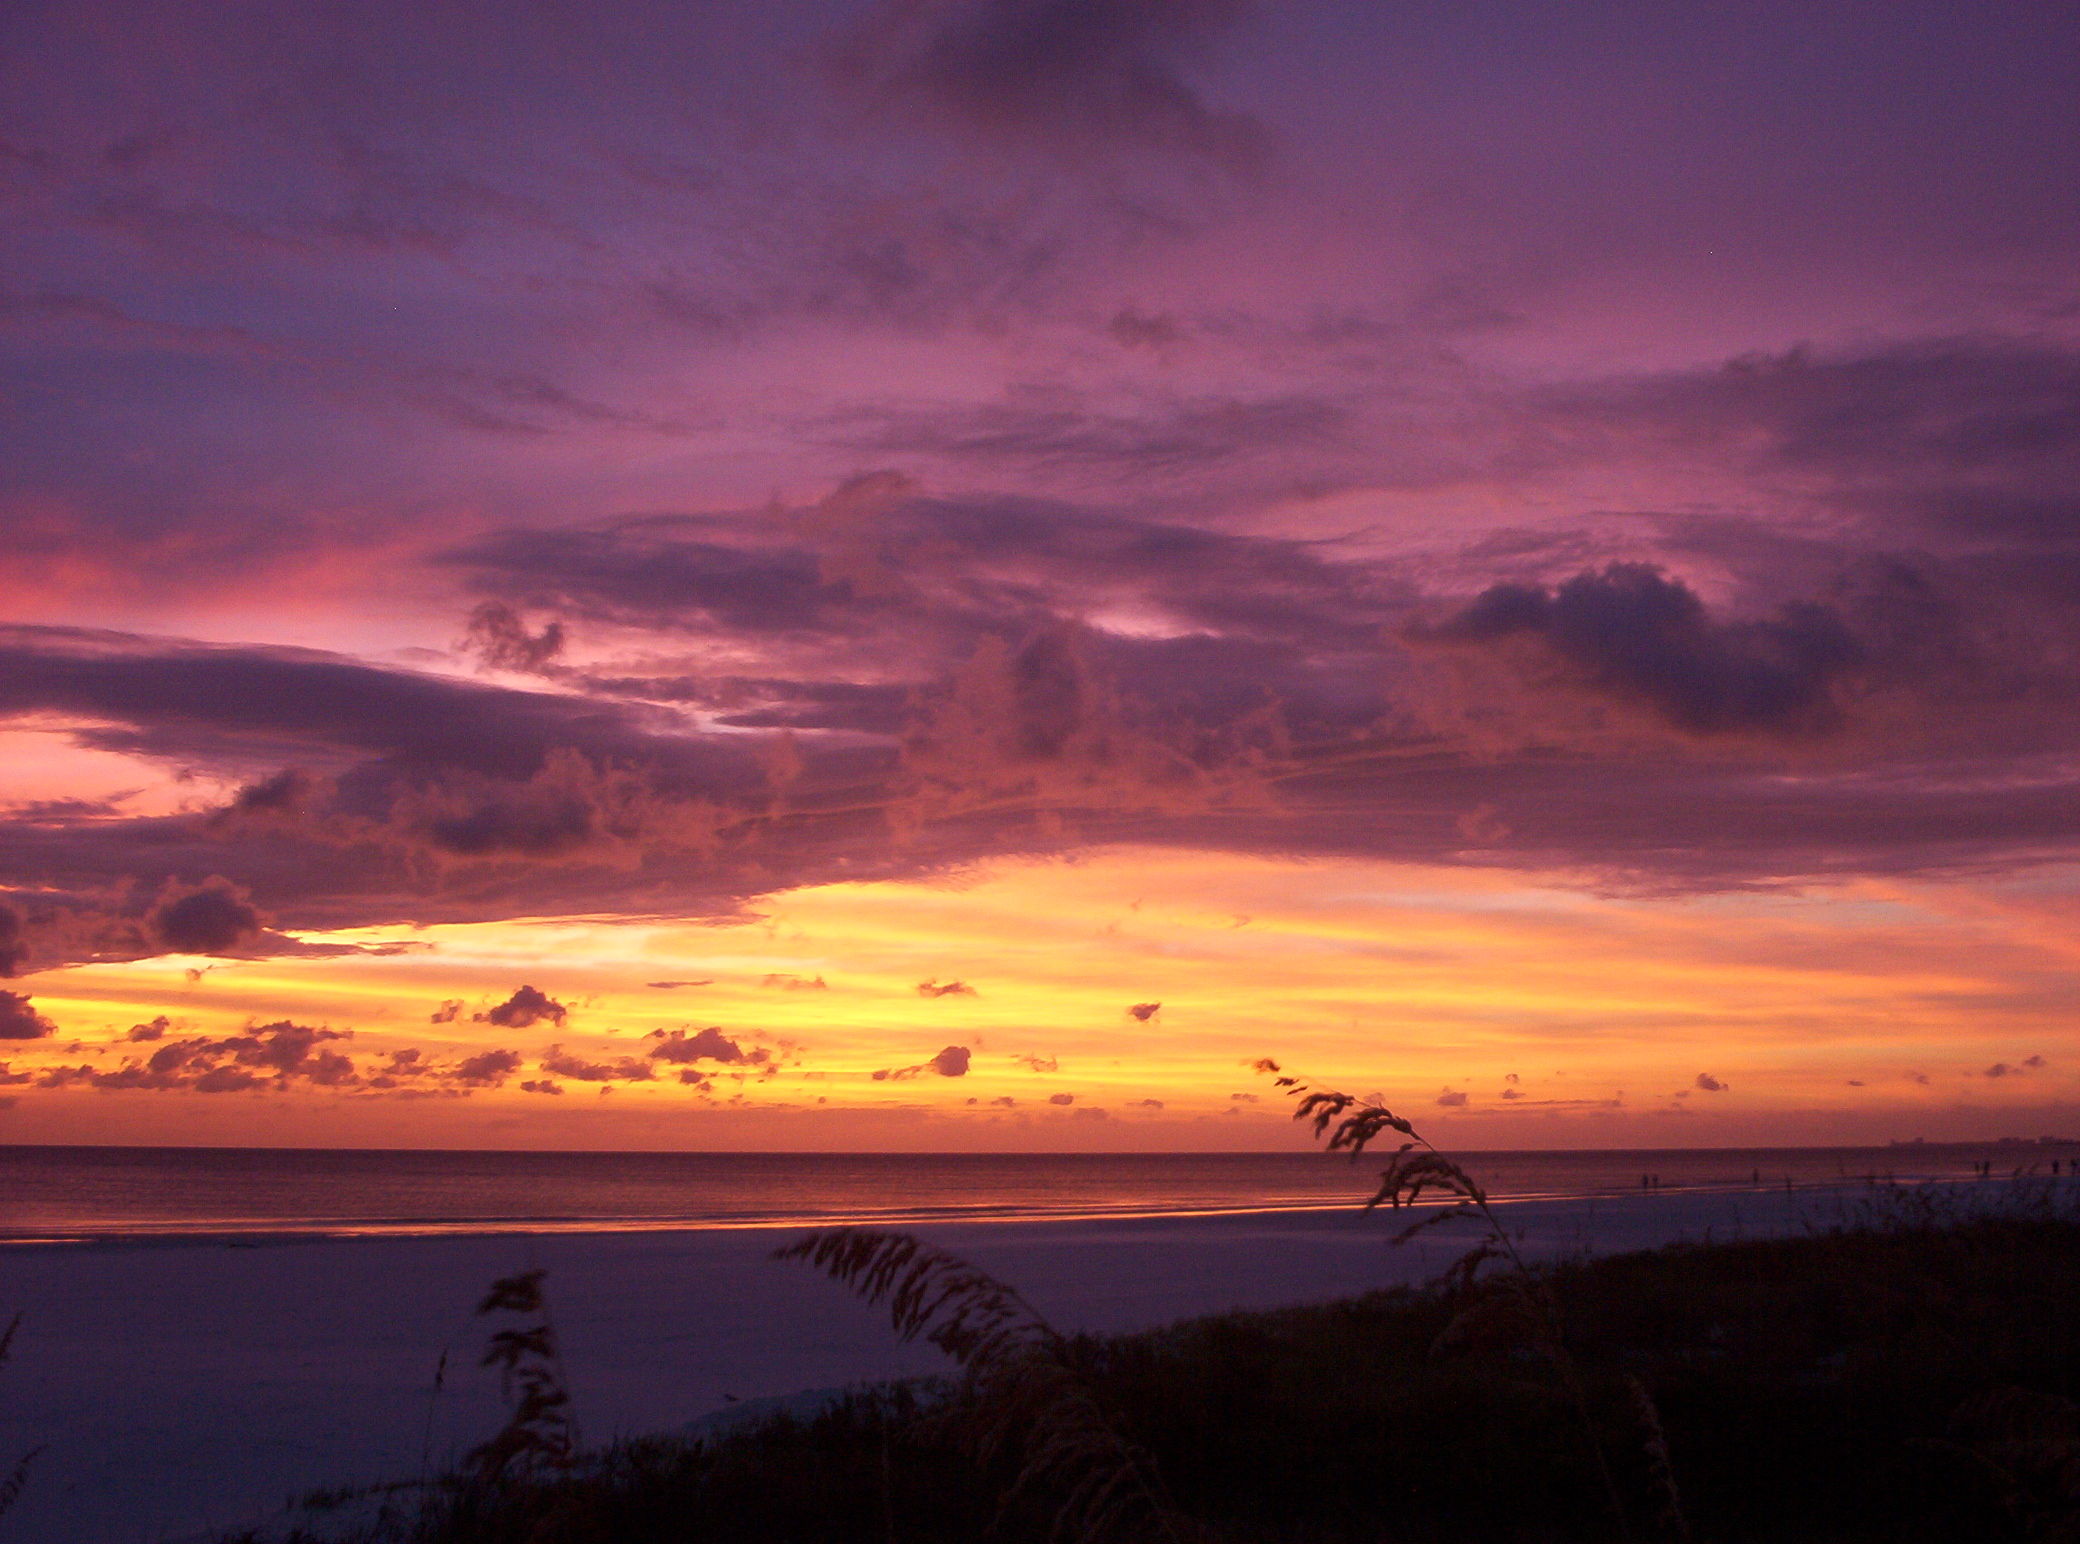 This is a sunset from St. Pete Beach at Hideaway Sands in September 2005. At this time there was a hurricane going through the Florida Keys. This was one of the most beautiful sunsets I have ever seen.